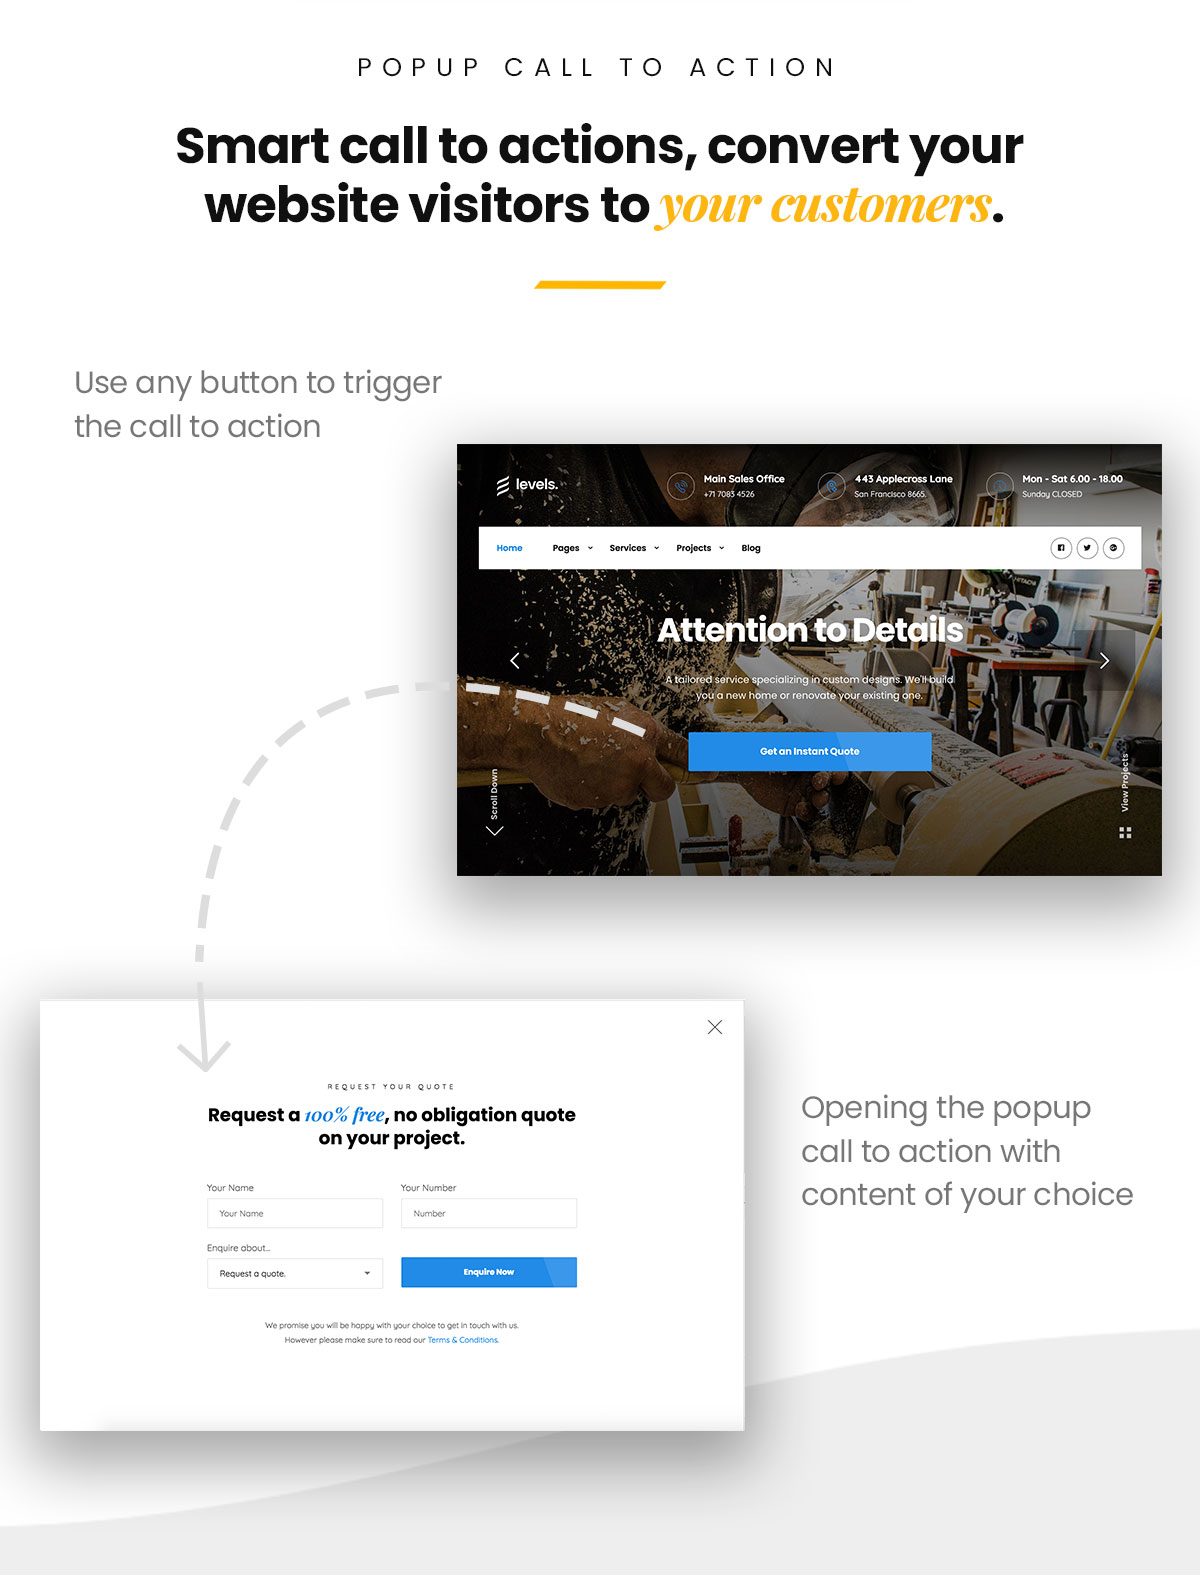 Smart call to actions, convert your website visitors to your customers.